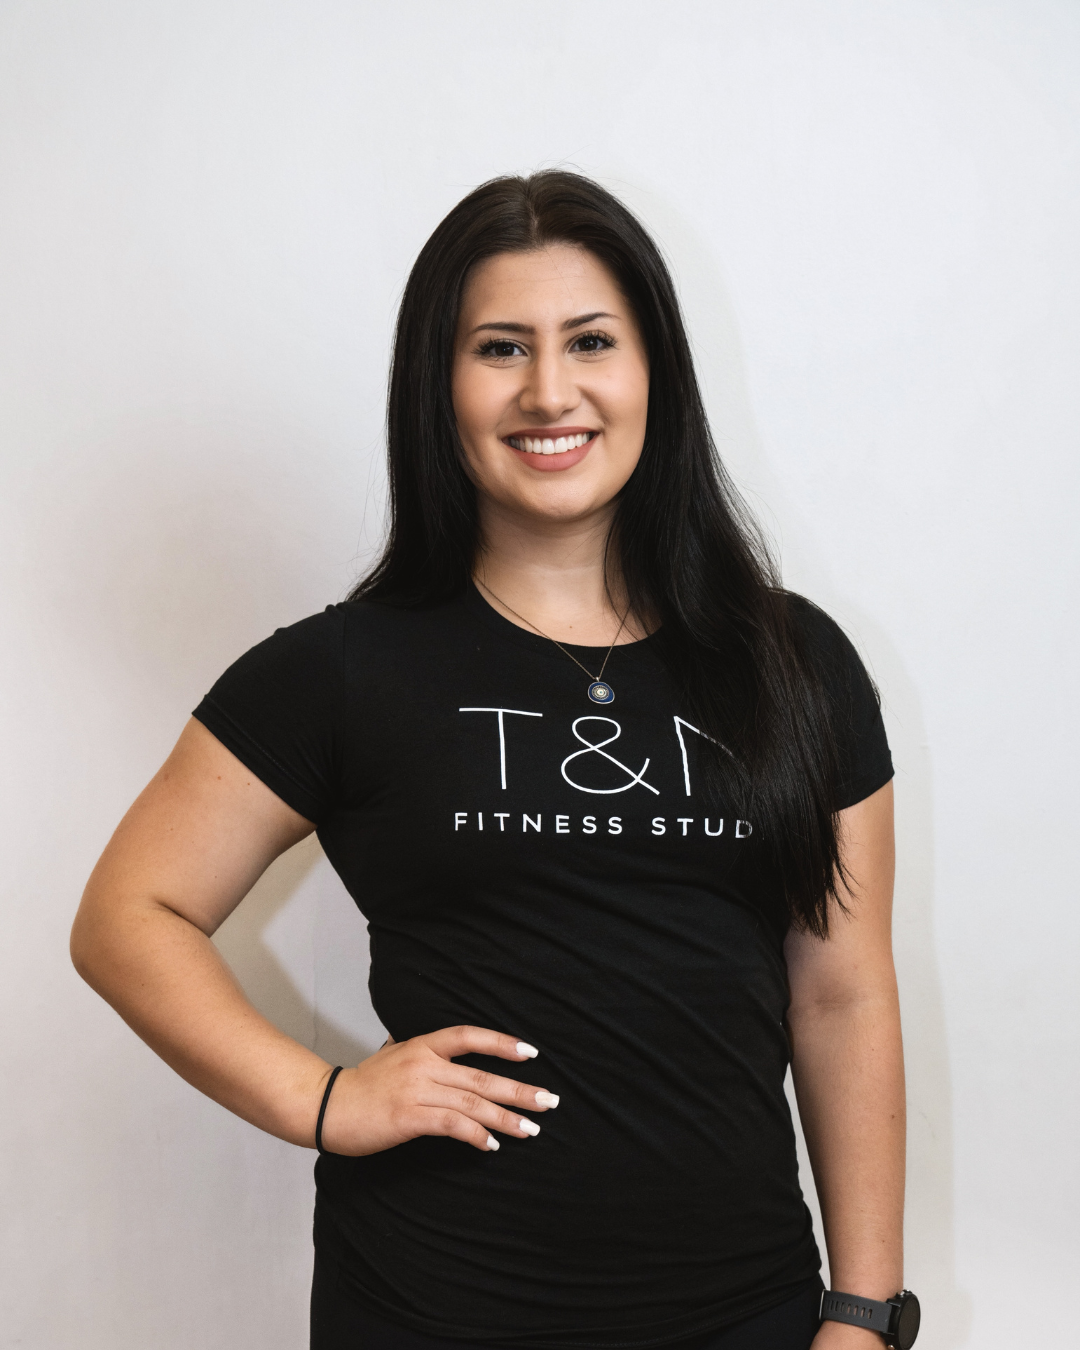 A woman wearing a black t-shirt representing the team of T&N Fitness Studio.